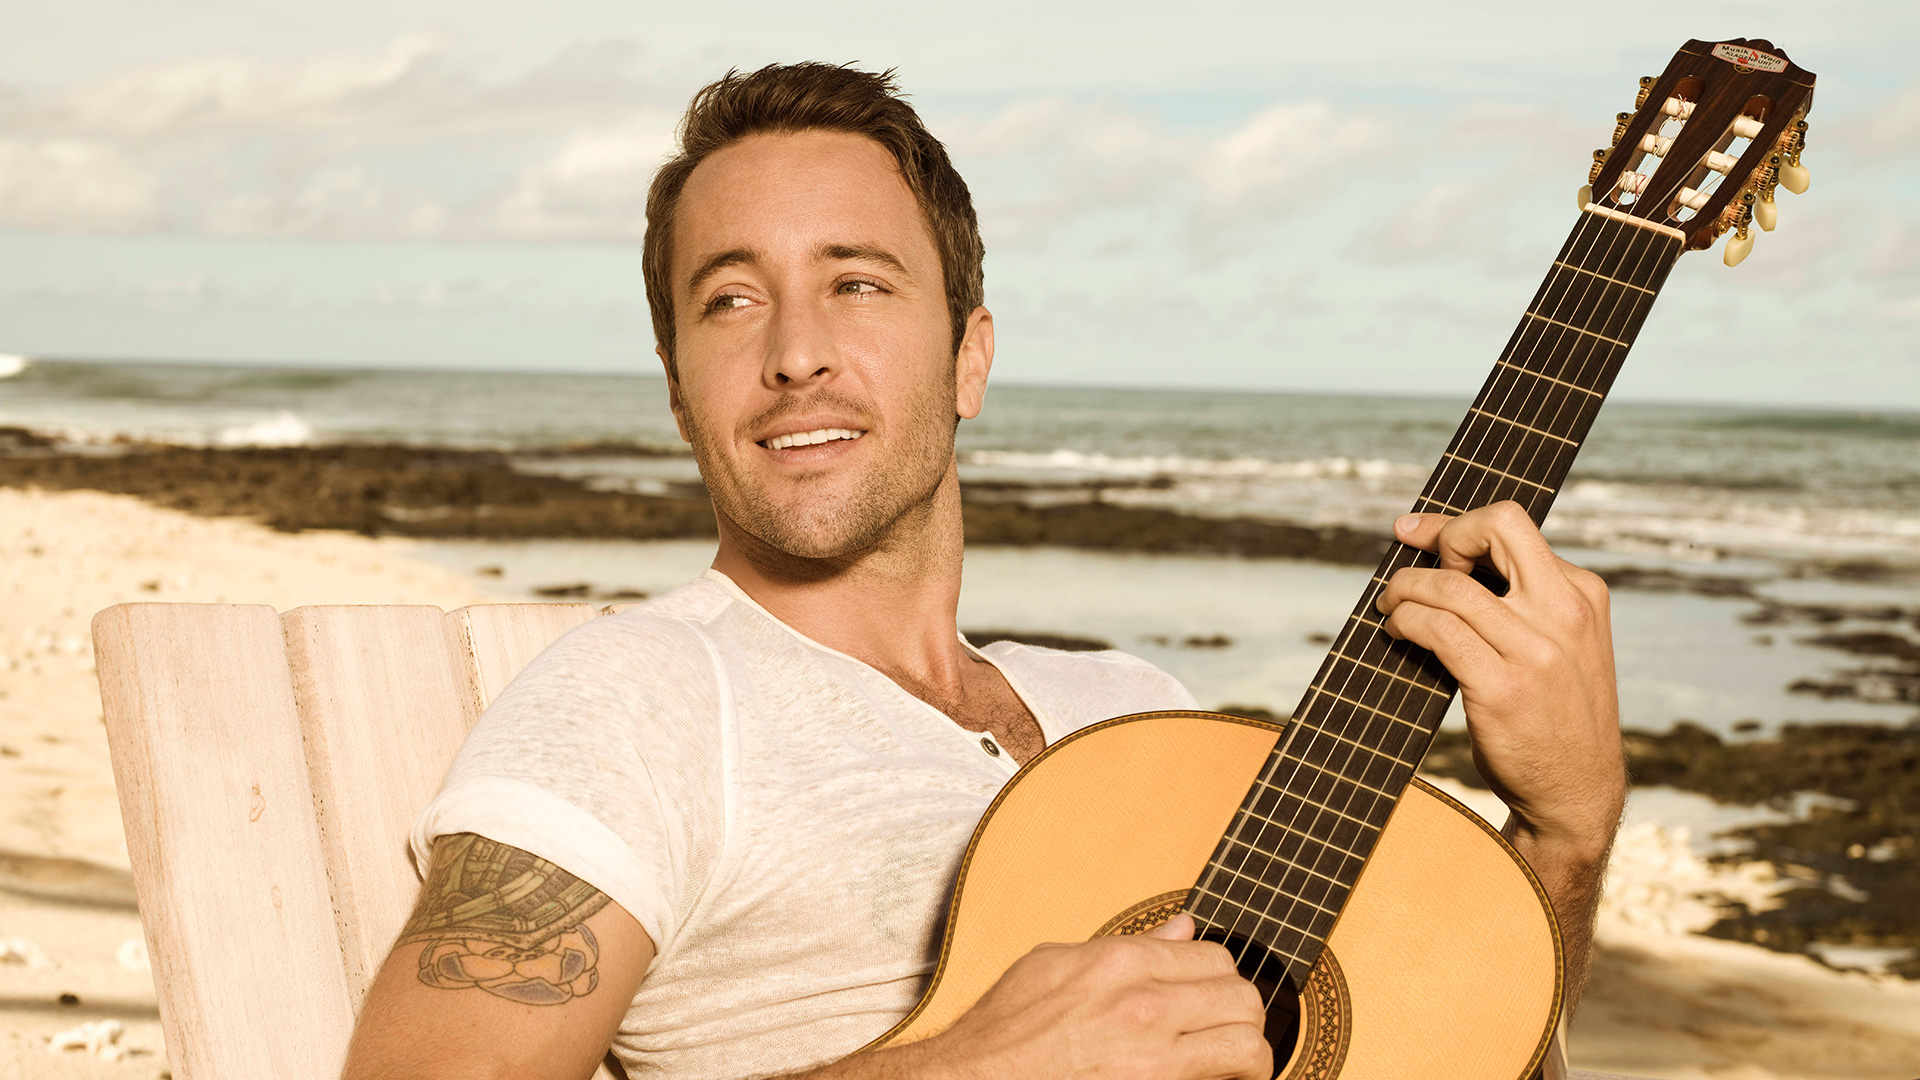 Nothing says spring great like Alex O'Loughlin strumming a guitar on the shore